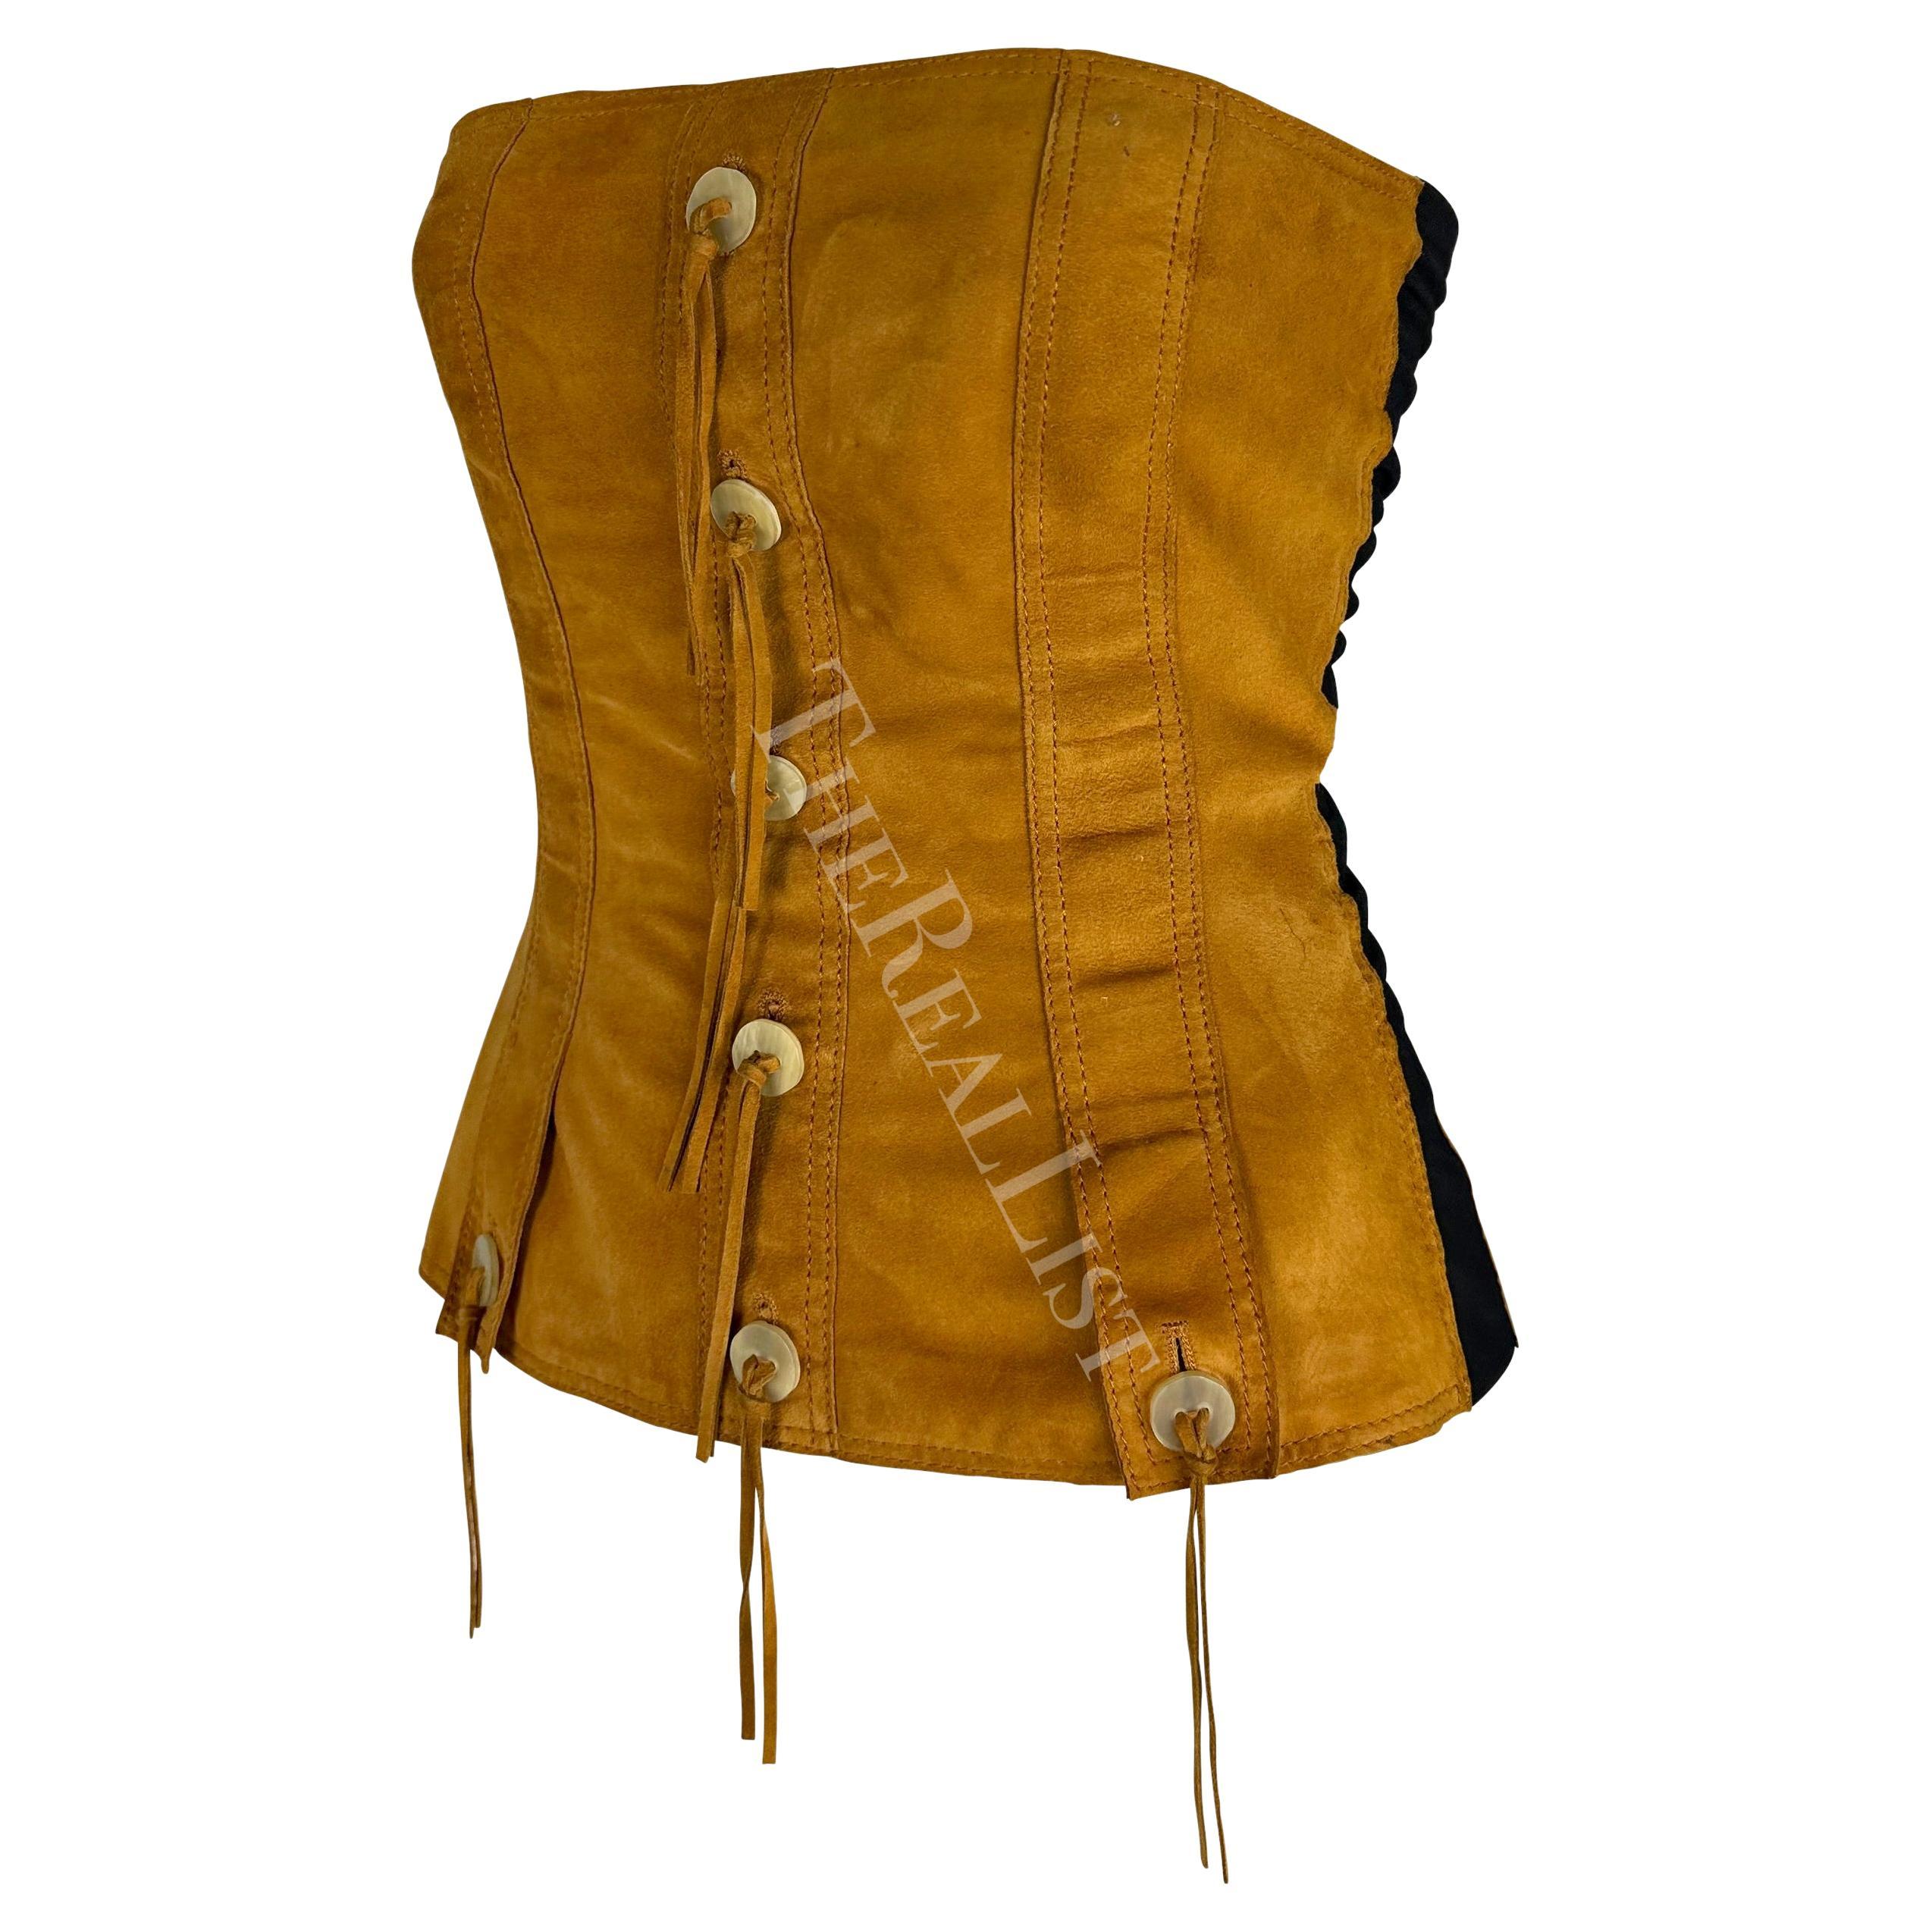 TheRealList presents: a tan suede Dolce & Gabbana strapless top. From the early 2000s this chic top is constructed of light brown suede with black sheer stretch panels on either side. The top is made of complete bone buttons and fringe accents.